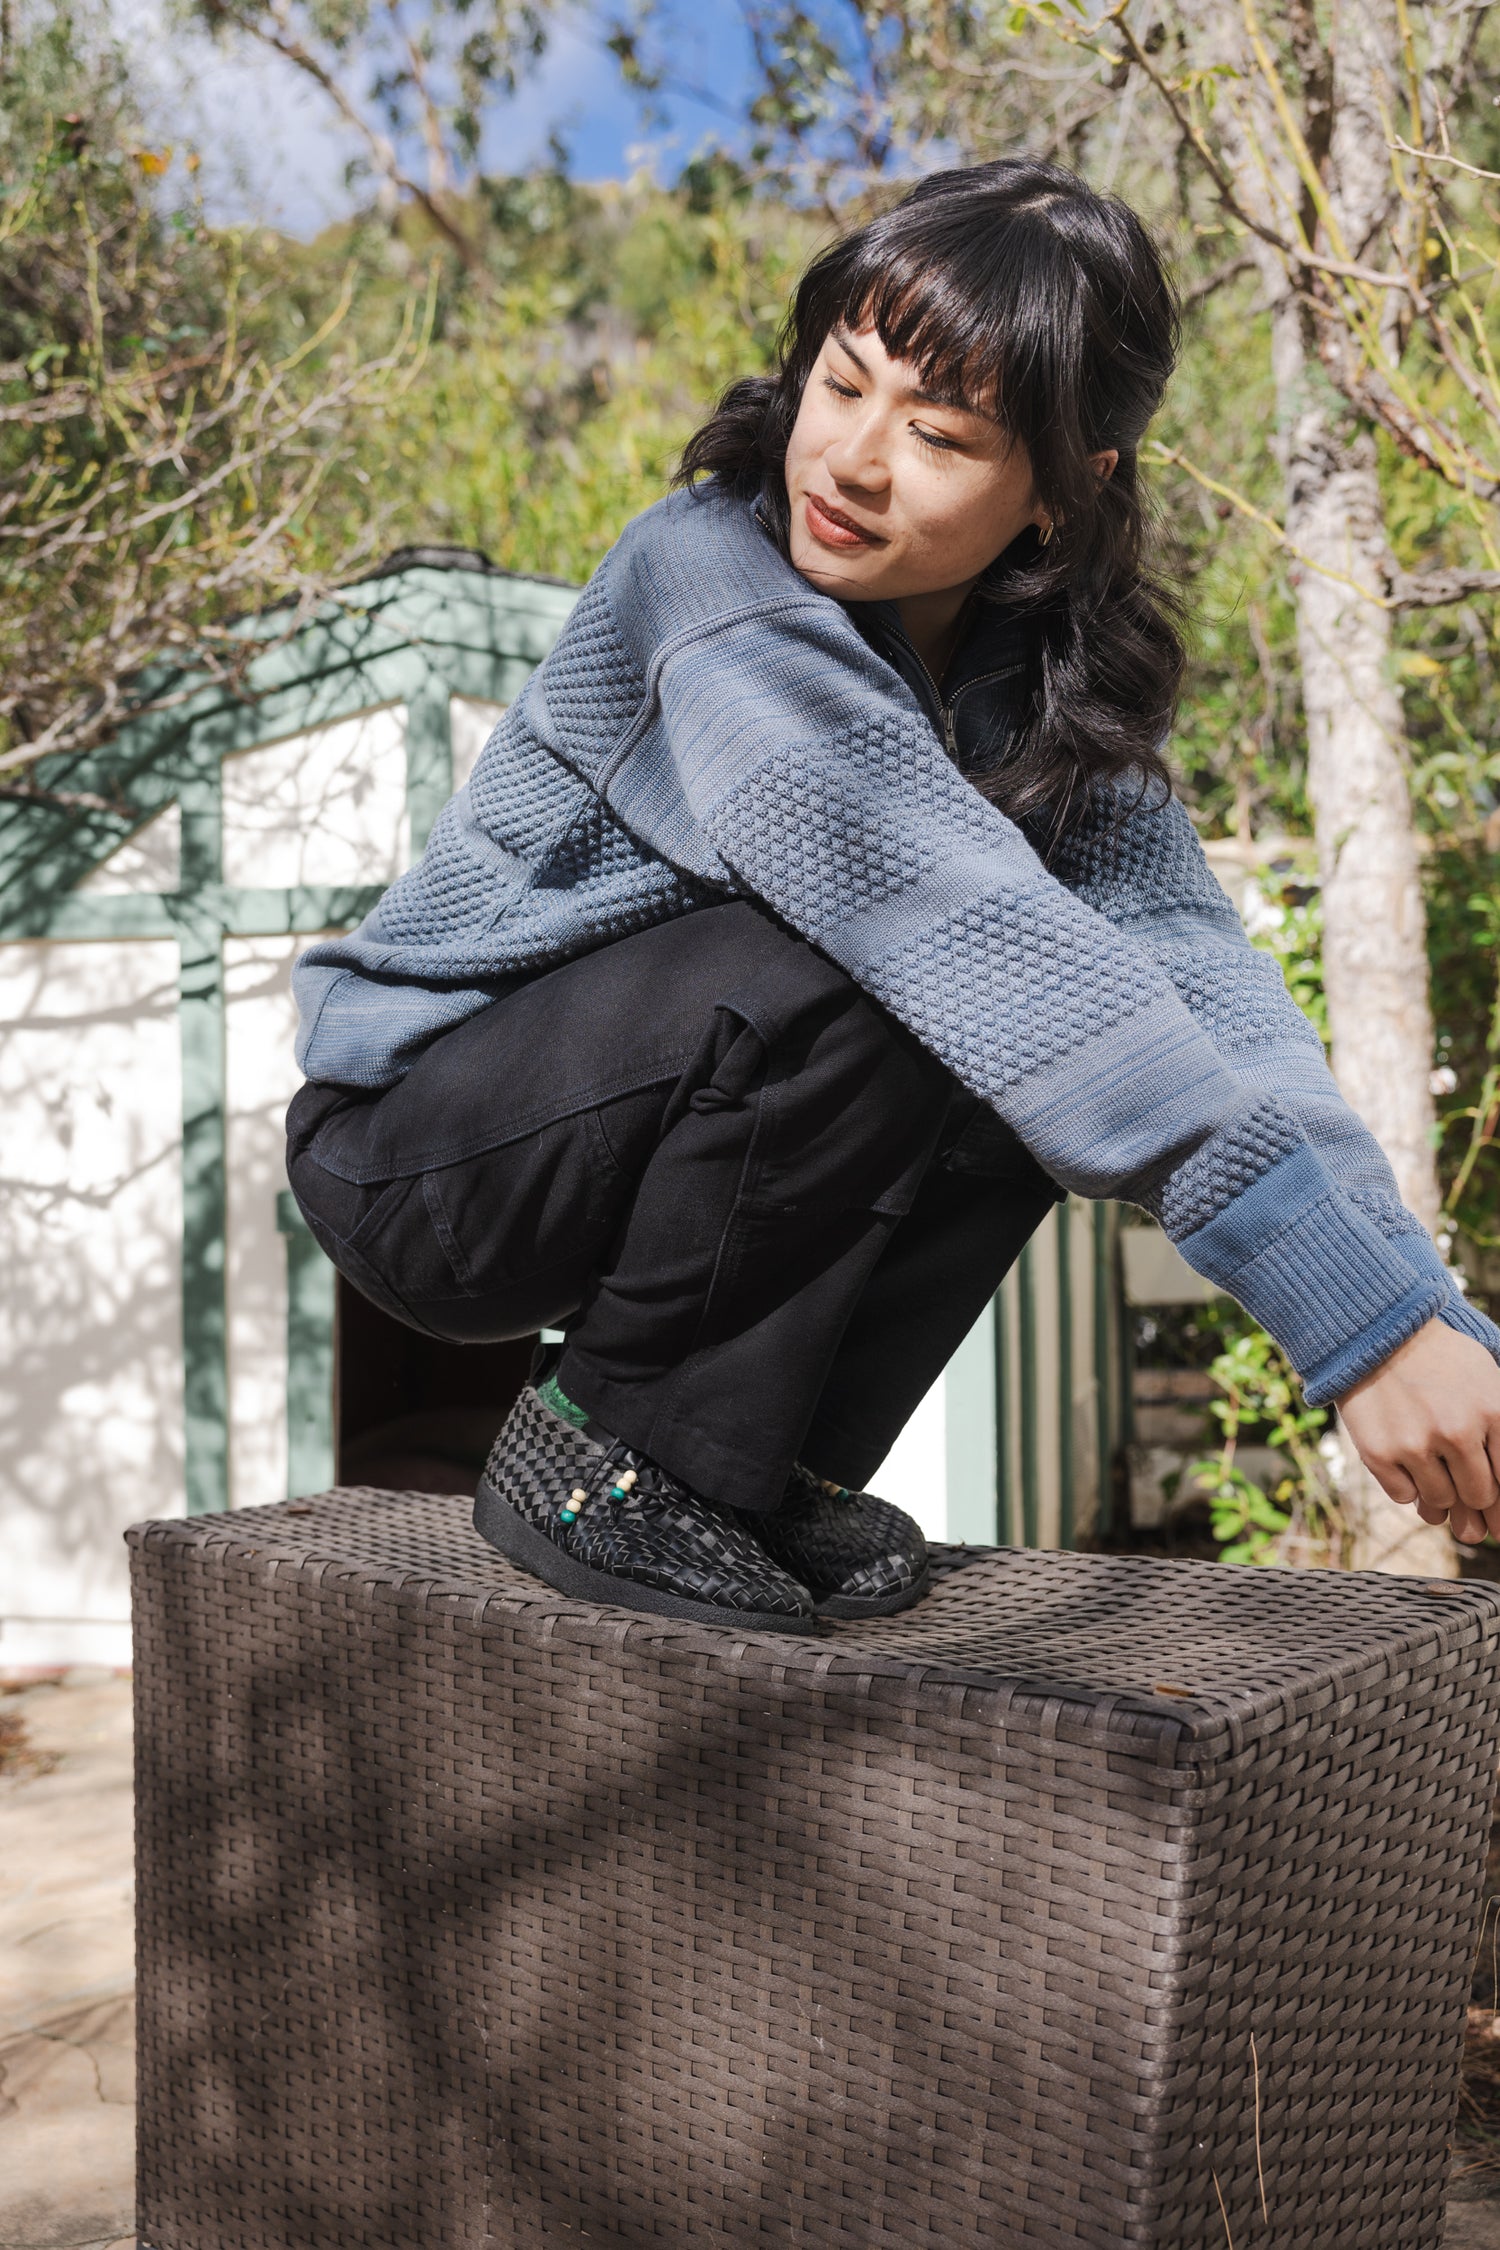 lifestyle photo of women with long black hair wearing Malibu Sandals all new Matador Chukka low in all black vegan leather with black pants and a faded blue sweater while crouching on a woven prop